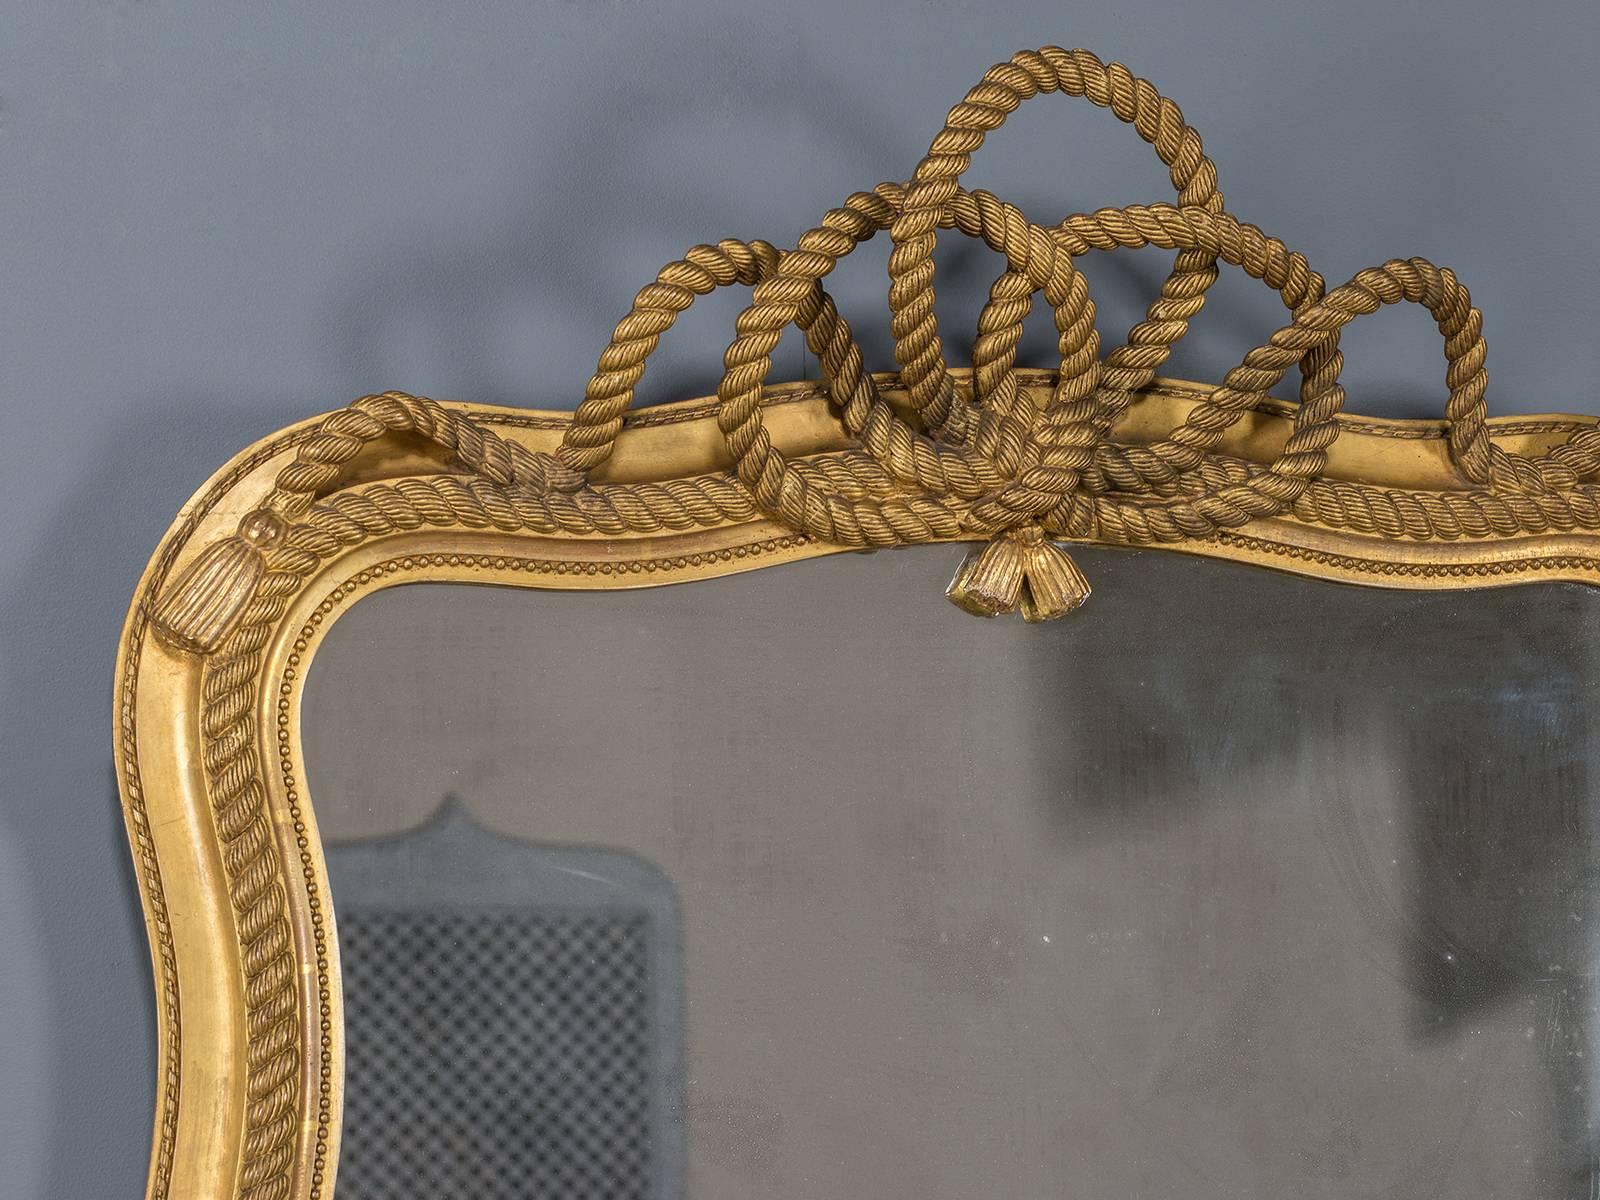 The intricate giltwood knot bow that adorns the top of this mirror is fully three dimensional and gives this antique English mirror its charming appearance. The gently curved sides of the mirror showcase the flow of the rope used to create the knot